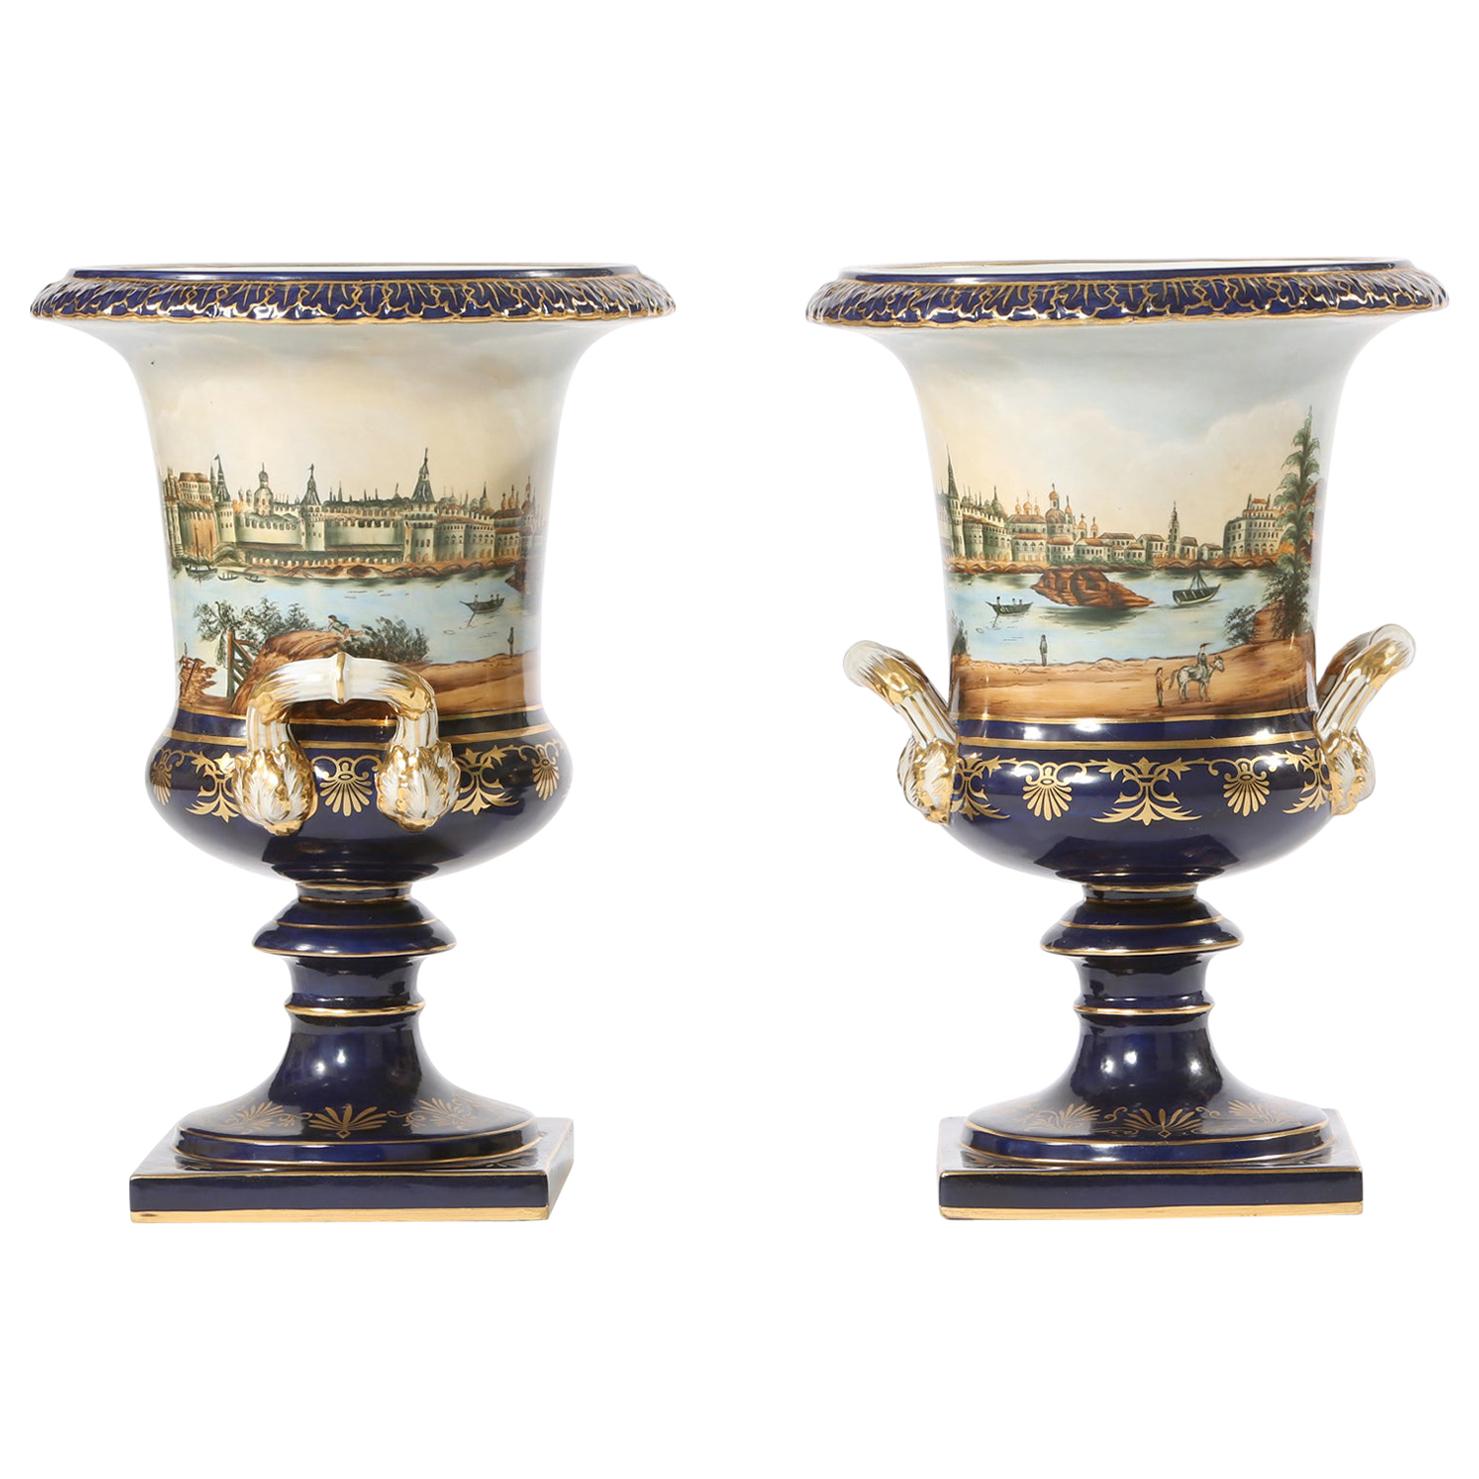 Early 20th Century Pair Porcelain Urns / Campana Shaped Vases For Sale